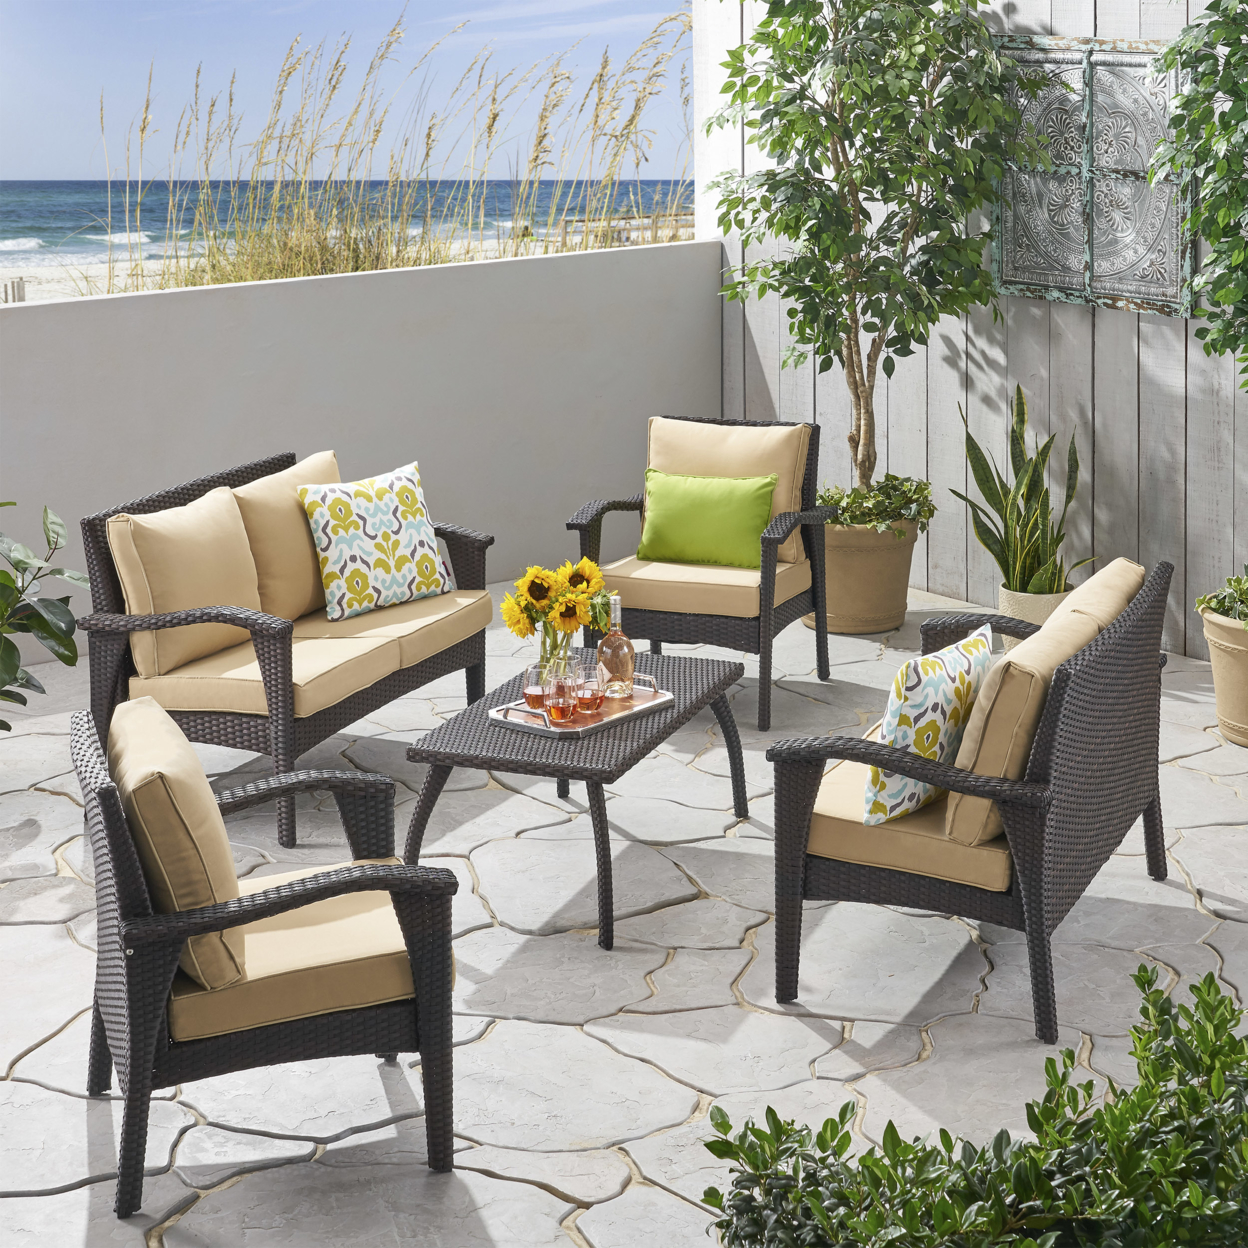 Belle Outdoor 6 Seater Wicker Chat Set With Cushions - Brown + Tan